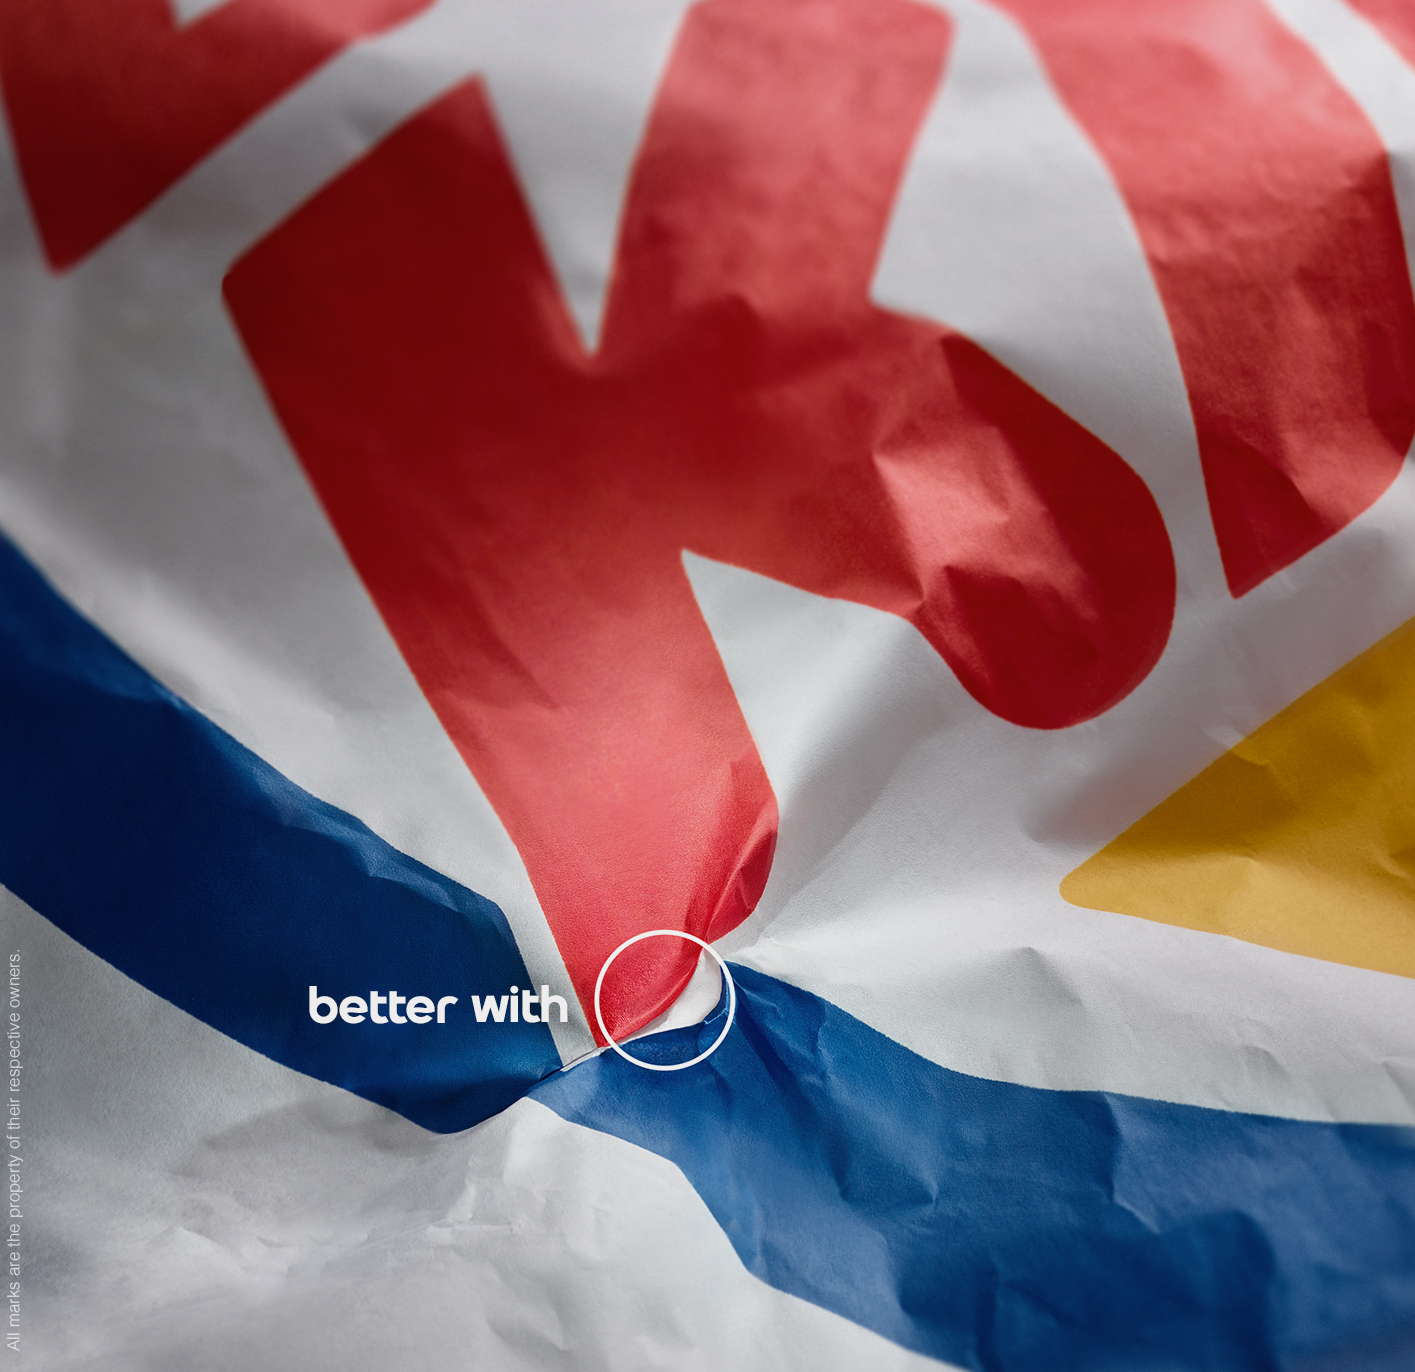 Better with Pepsi